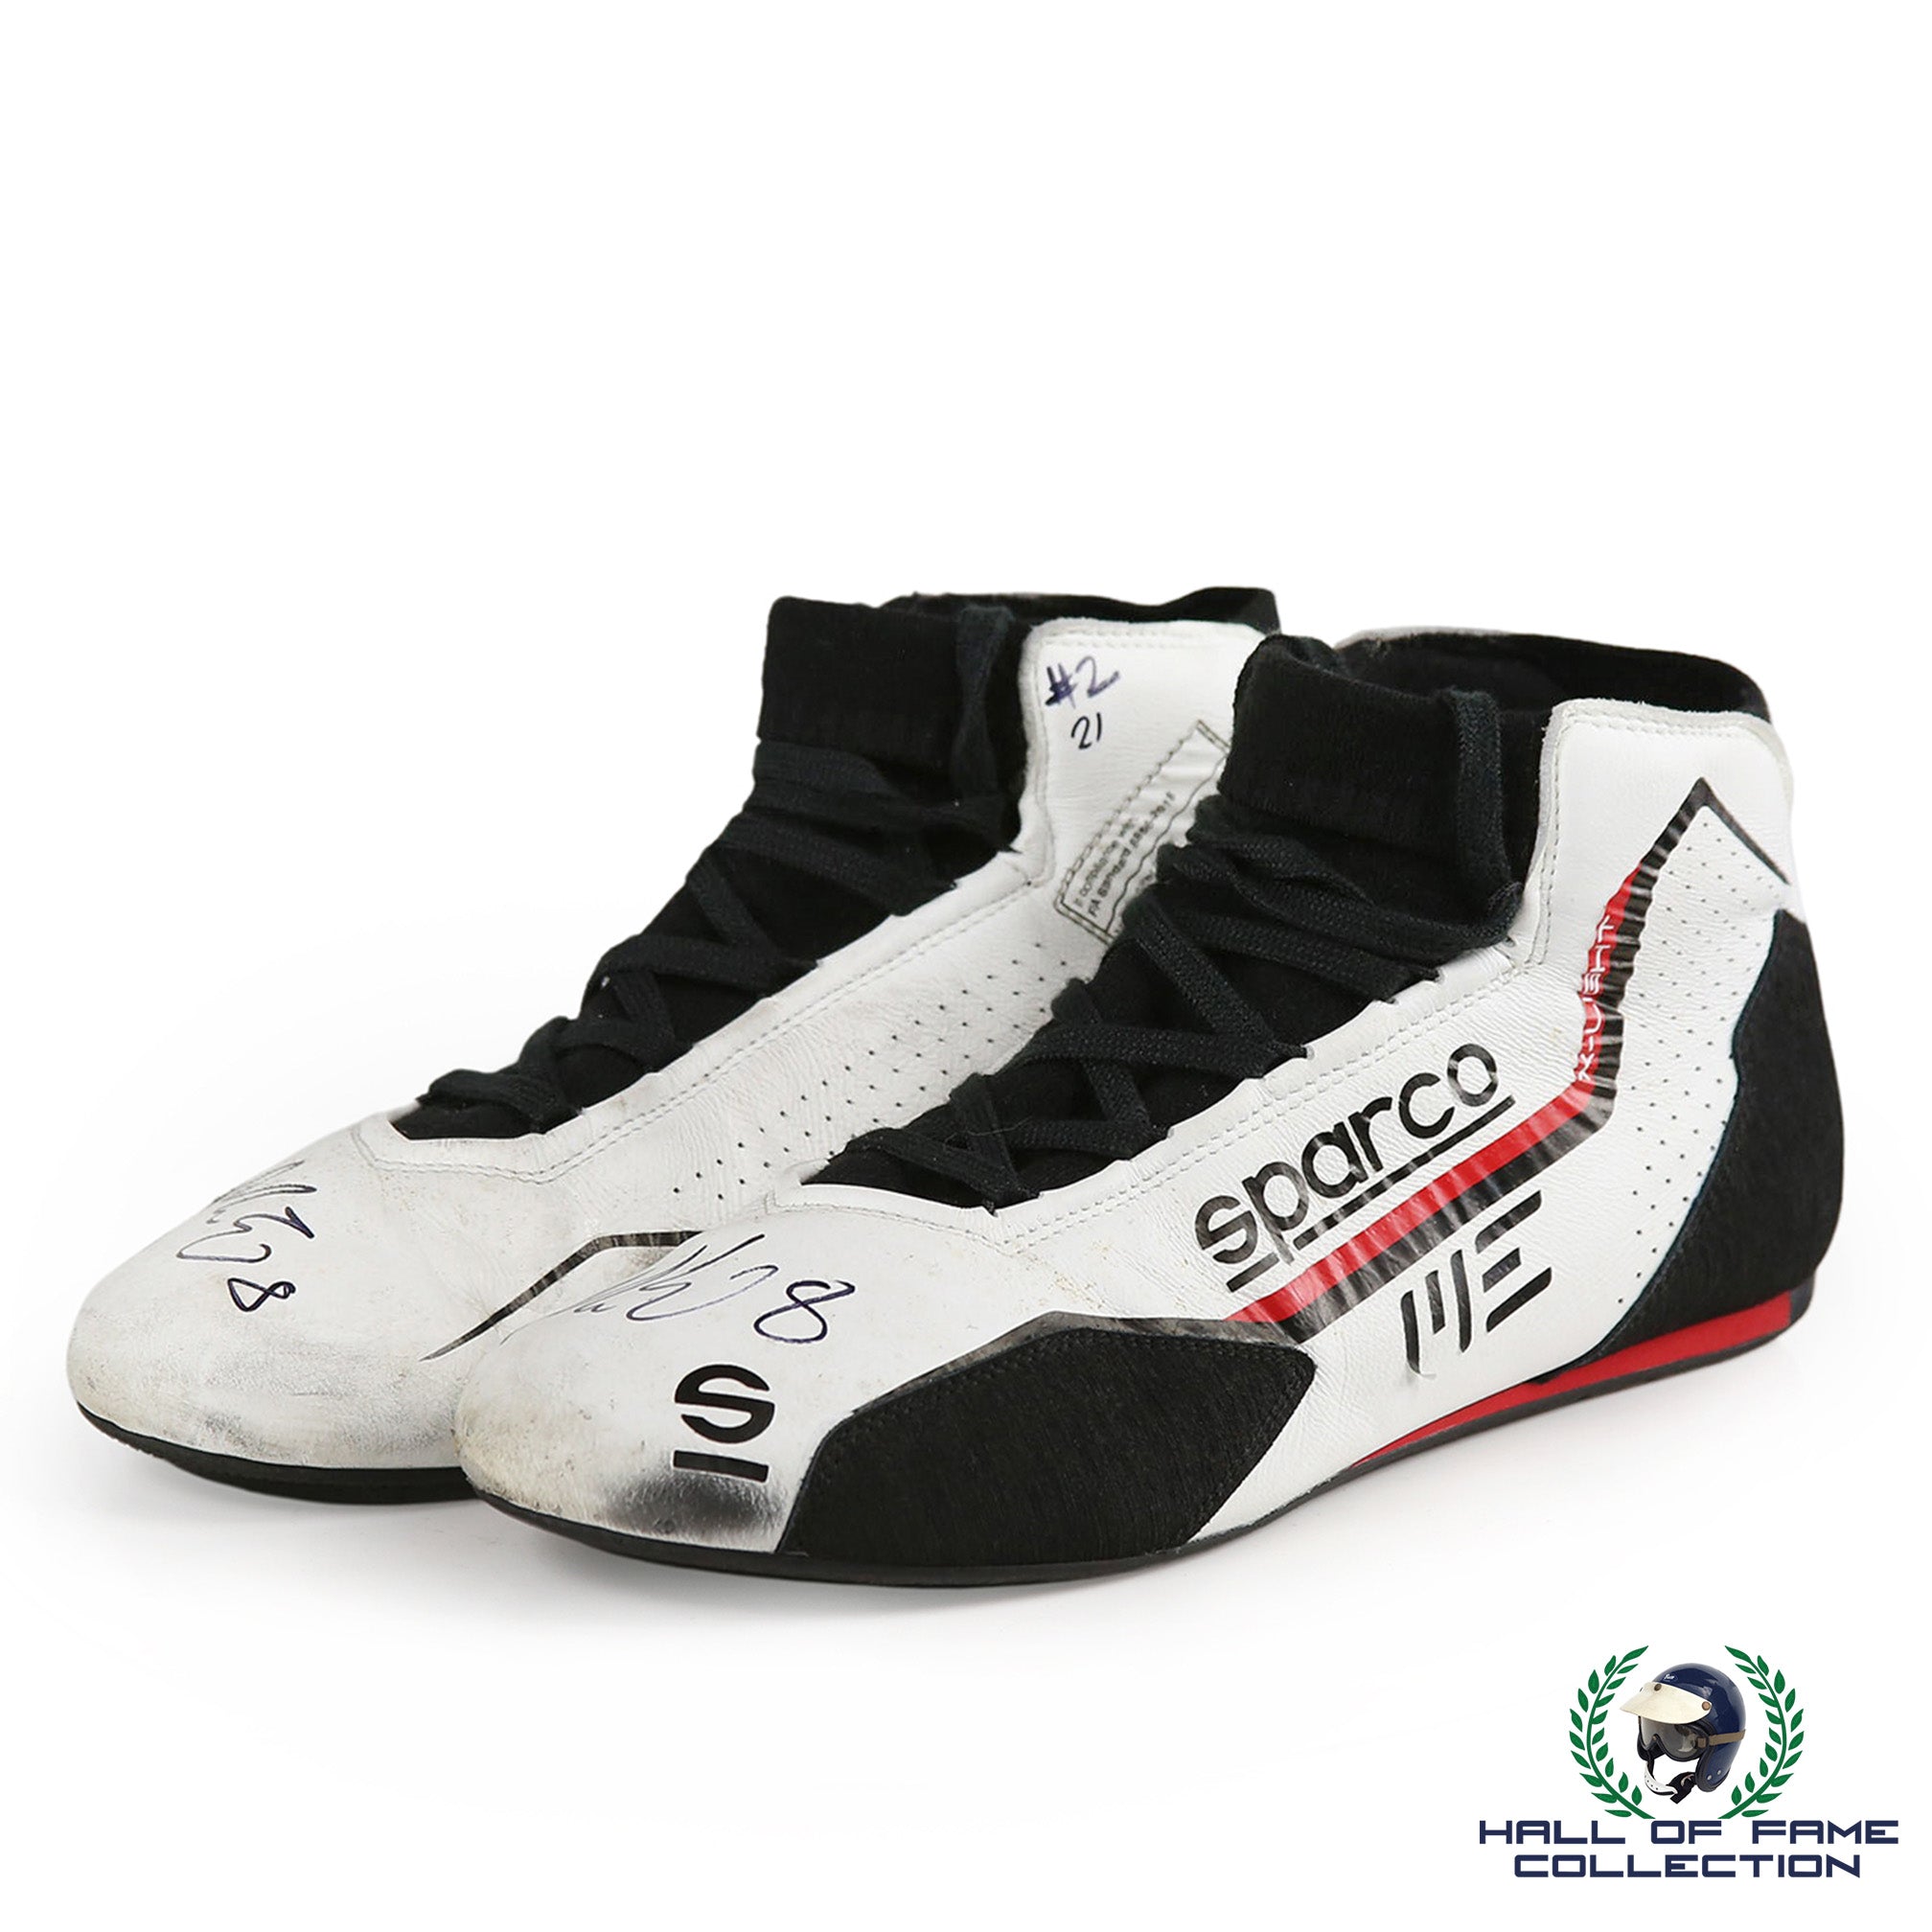 2021 Marcus Ericsson Signed Race Used Indy 500 / Indy GP Chip Ganassi Racing IndyCar Boots